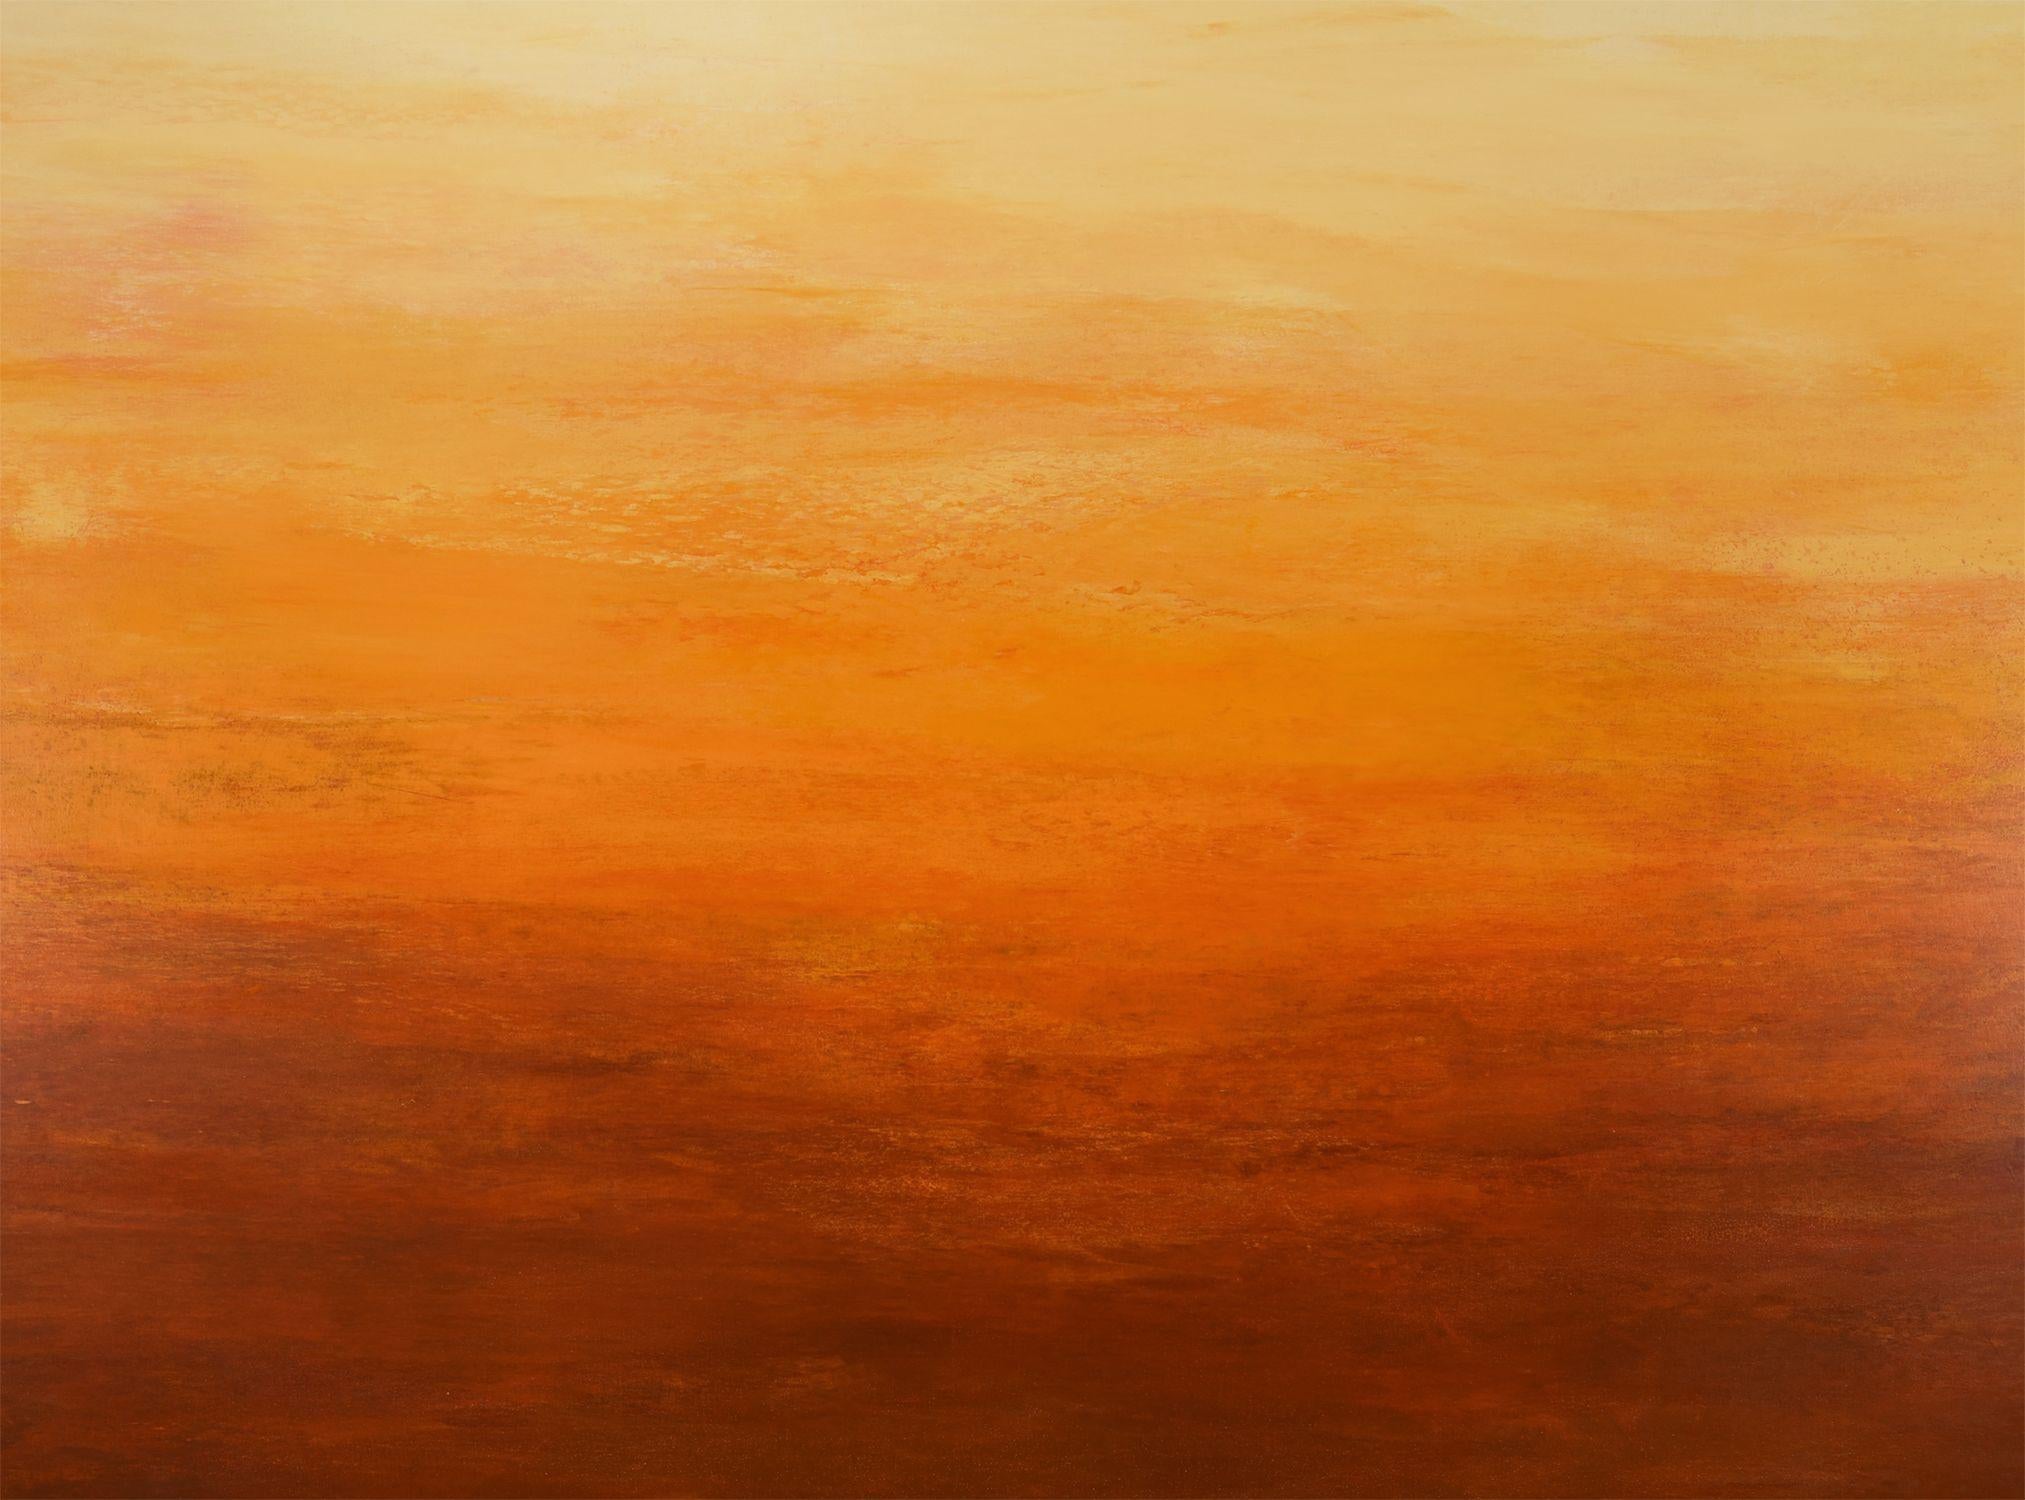 Summer Nectar is an original abstract color field painting on canvas by Suzanne Vaughan. An abstract expressionist style painting with thick layers of paint in warm vibrant yellow, amber and burnt orange. The paint is applied to the canvas in free